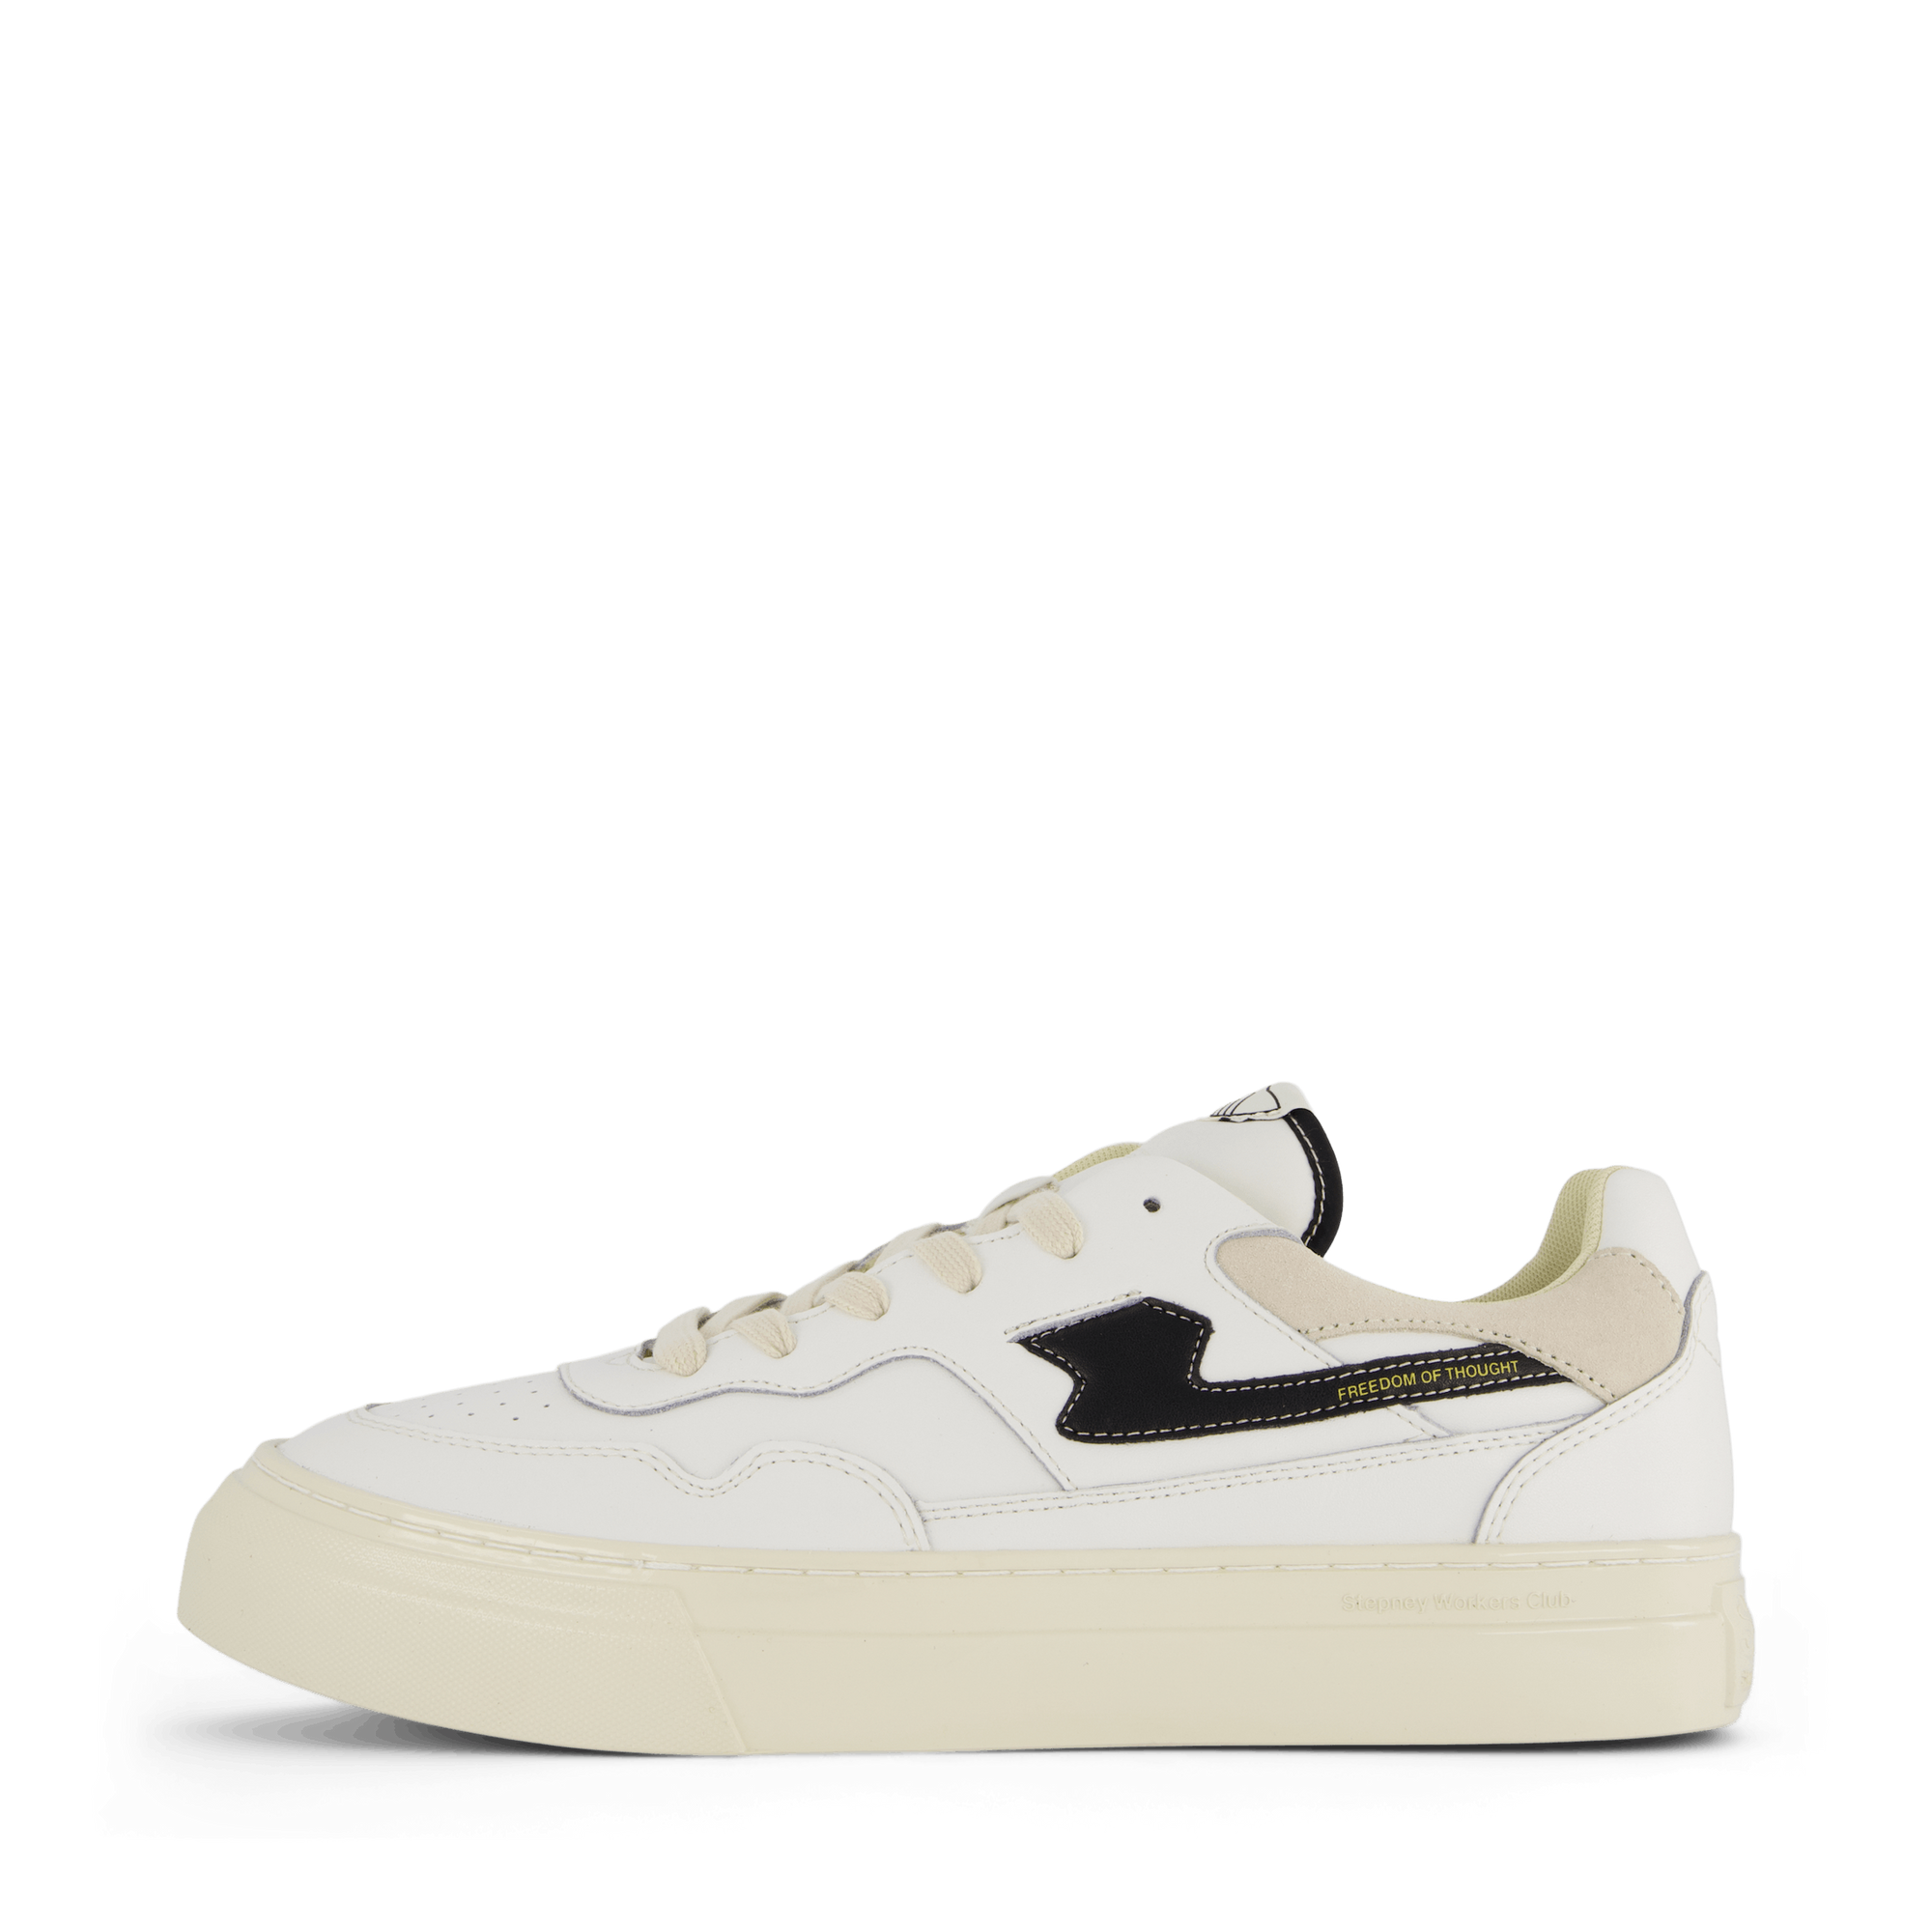 Pearl S-strike Leather Wht/blk